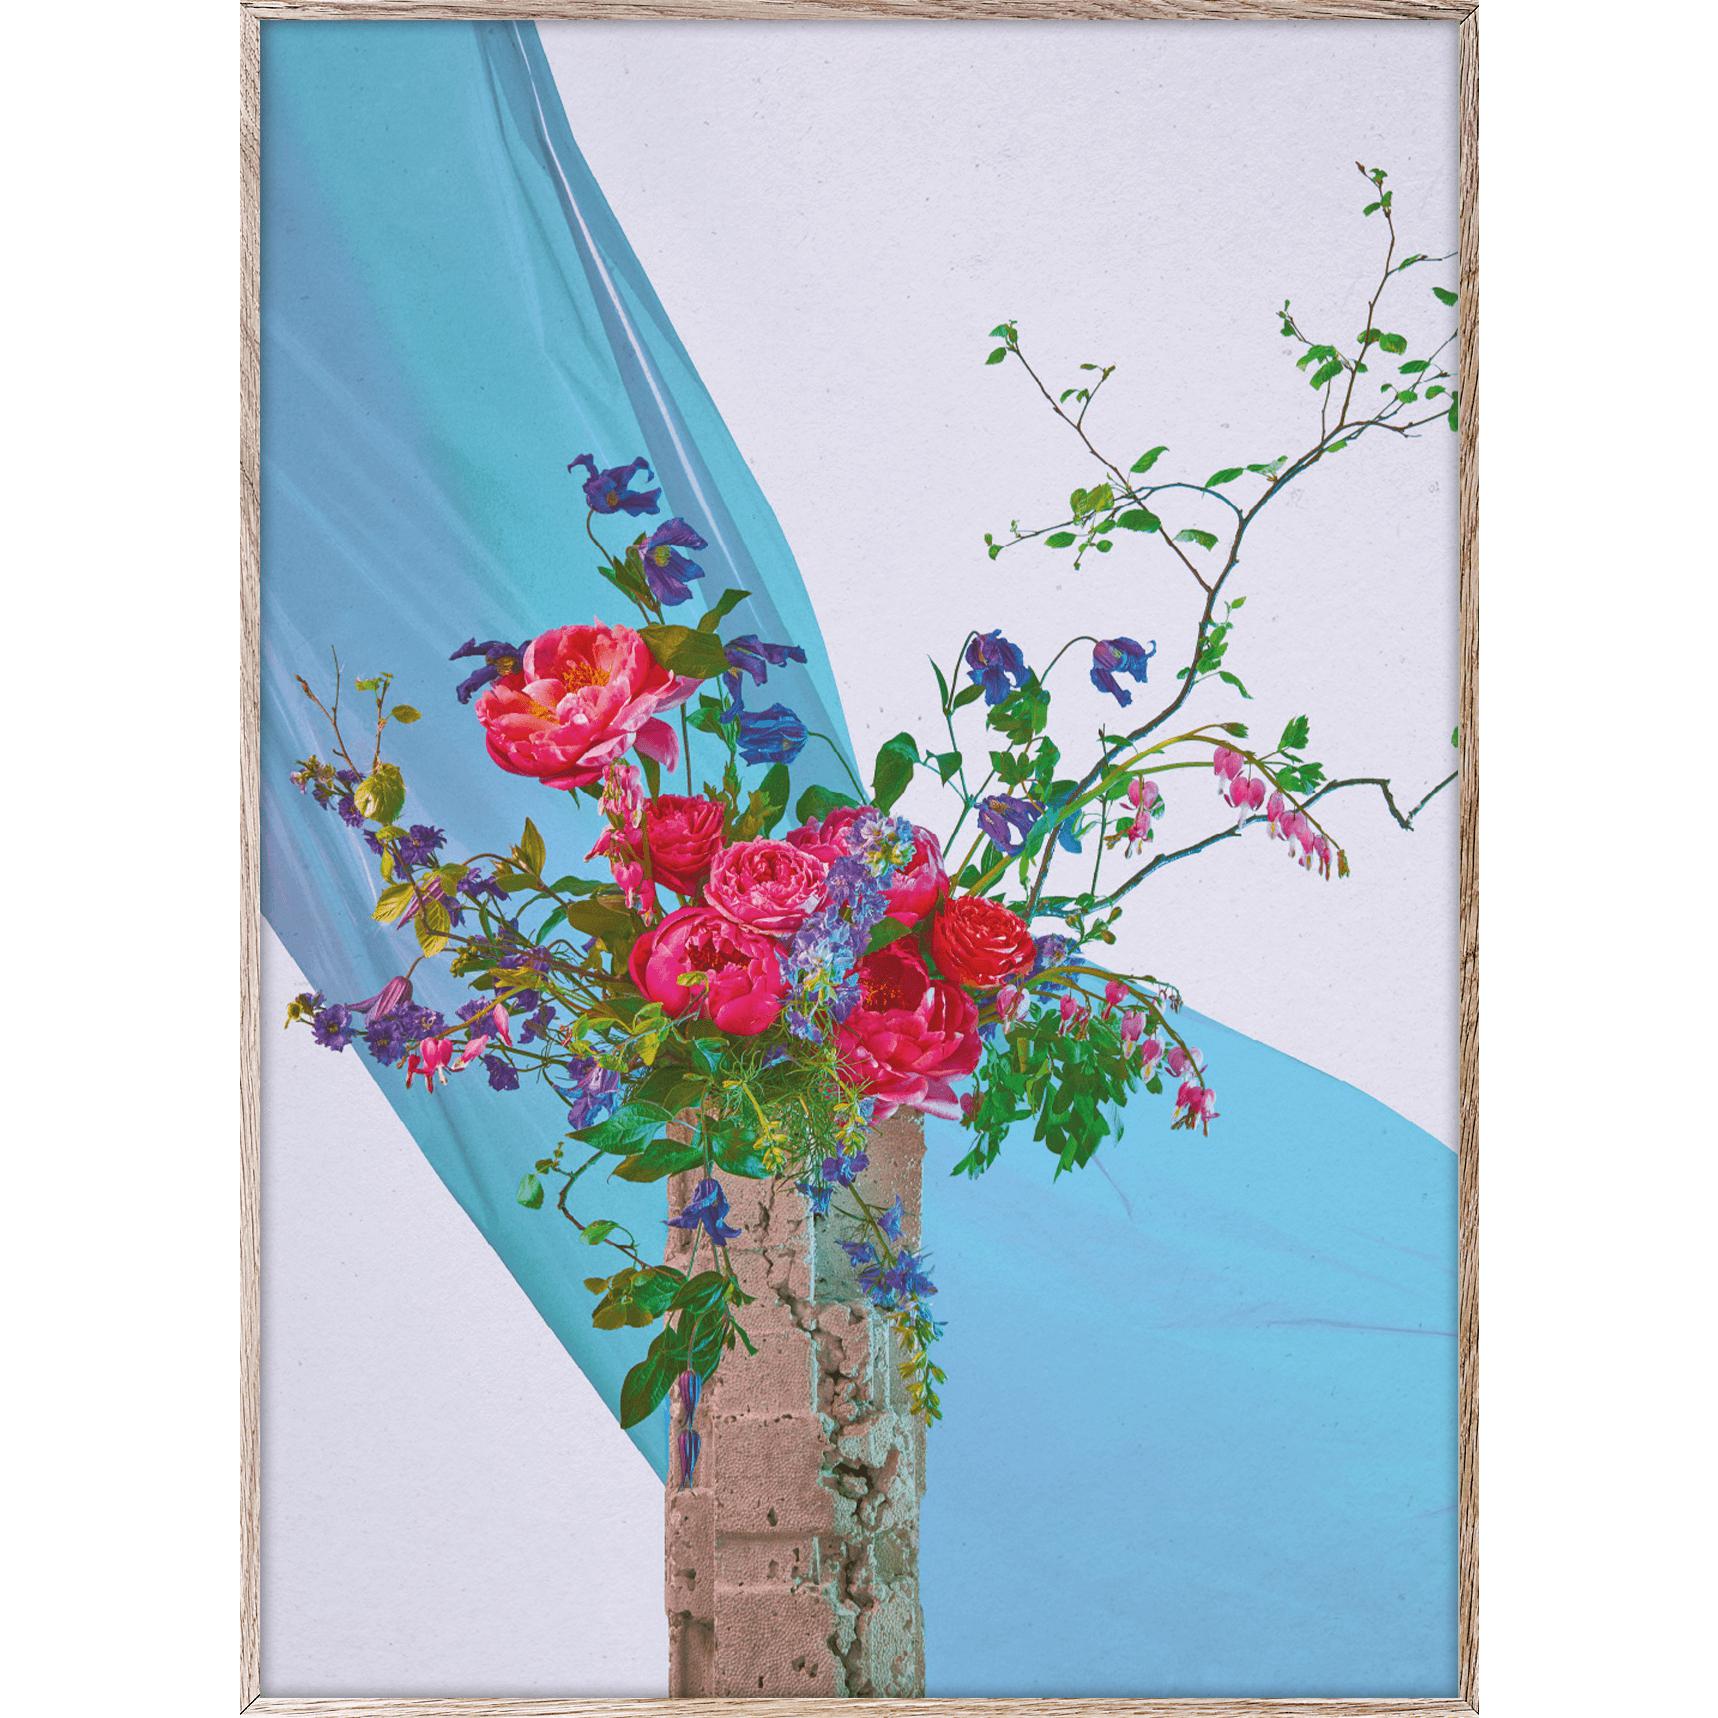 Paper Collective Bloom 05 Poster 30x40 Cm, Turquoise